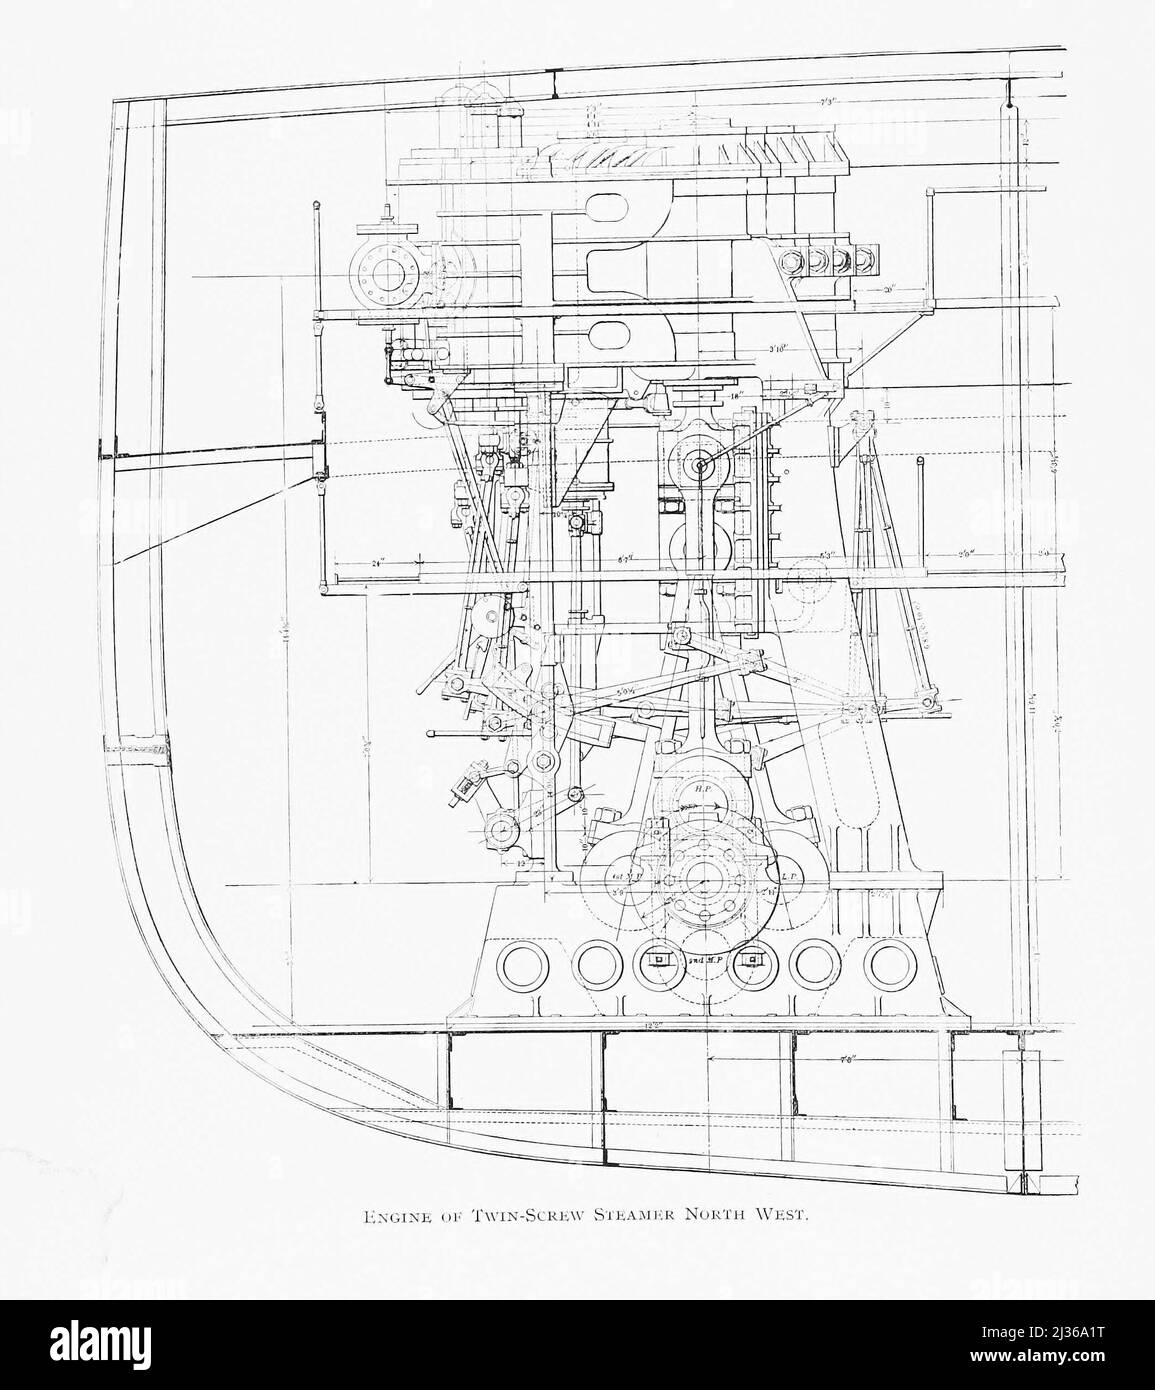 Engine Of the twin Screw Steamer North West. from the book ' Steam vessels and marine engines ' by G. Foster Howell, Publisher New York : American Shipbuilder 1896 Stock Photo